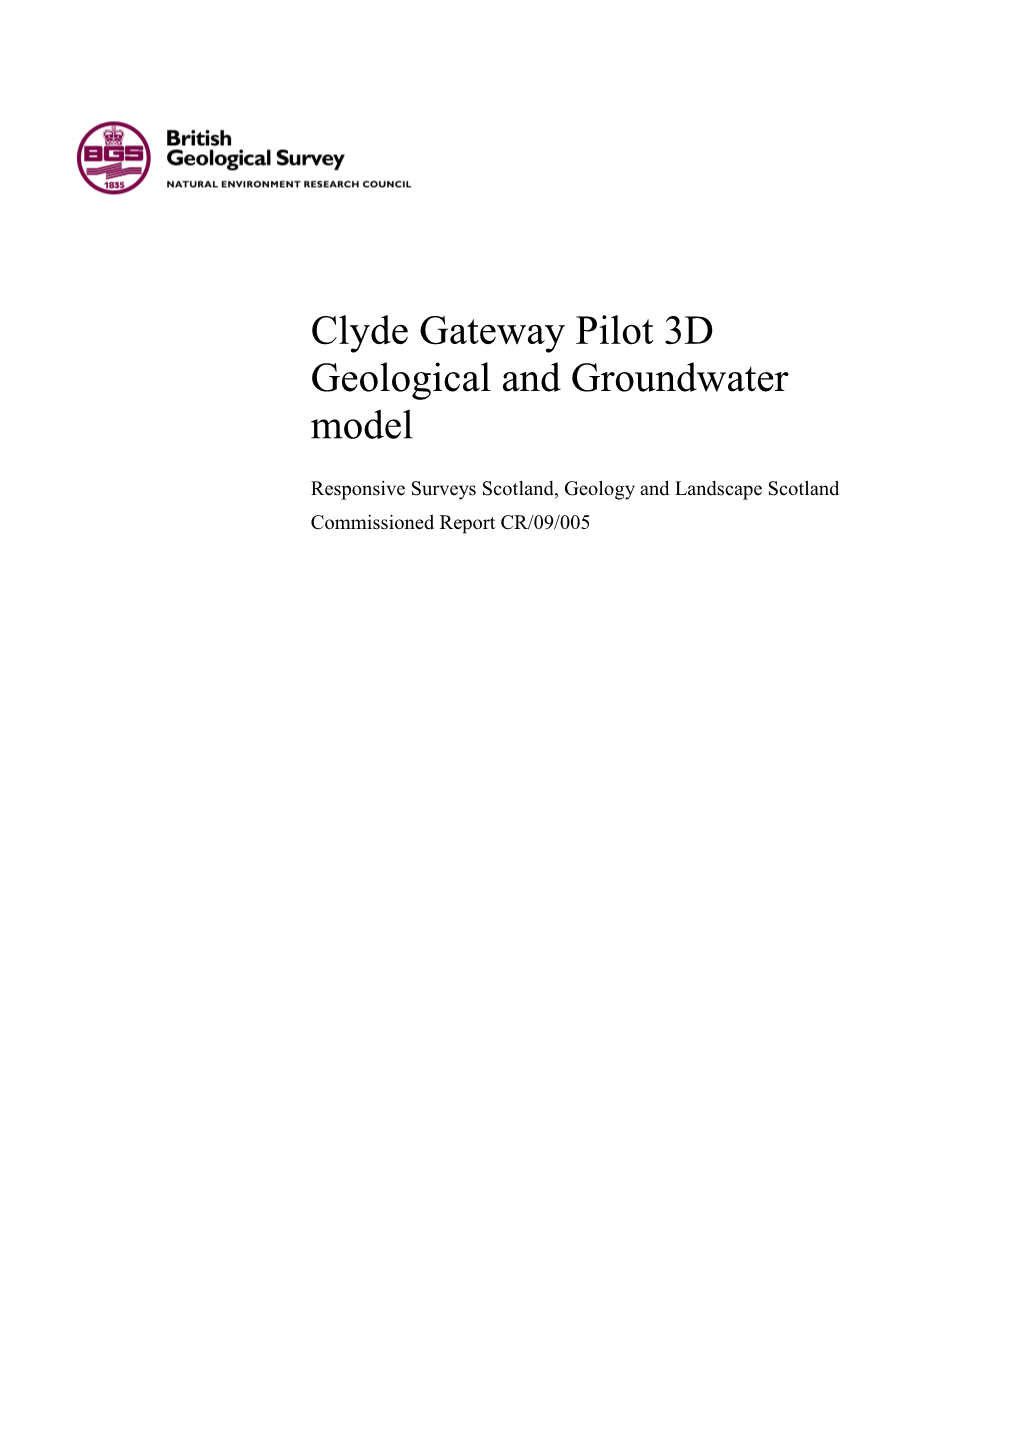 Clyde Gateway Pilot 3D Geological and Groundwater Model